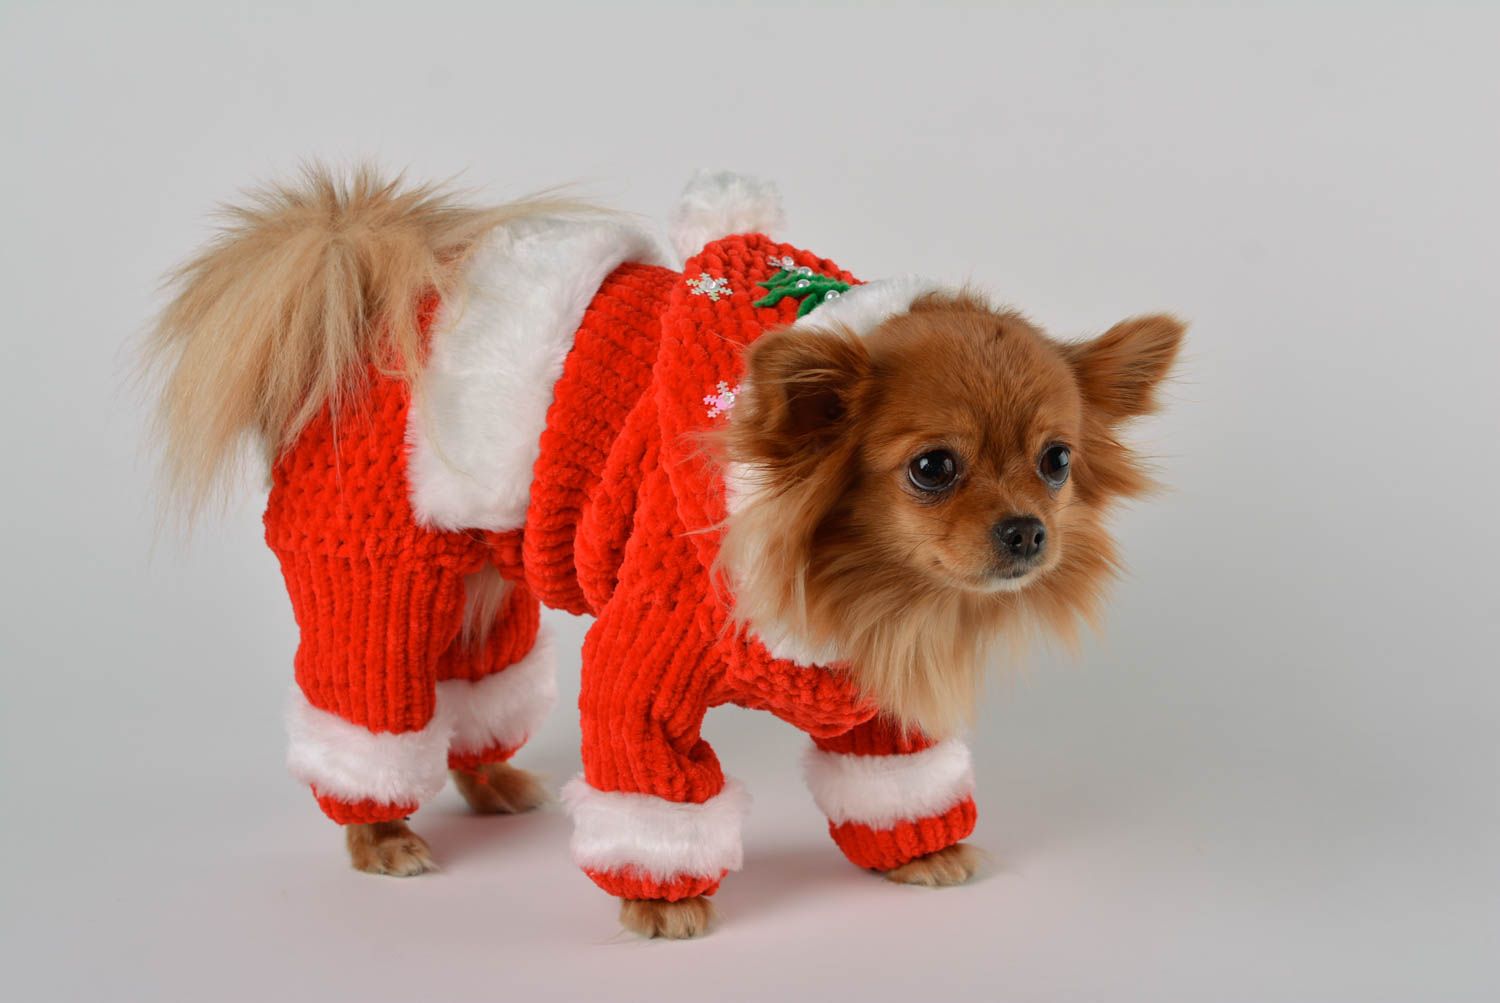 Unusual handmade crochet dog clothes dog apparel pet accessories dog outfits photo 1